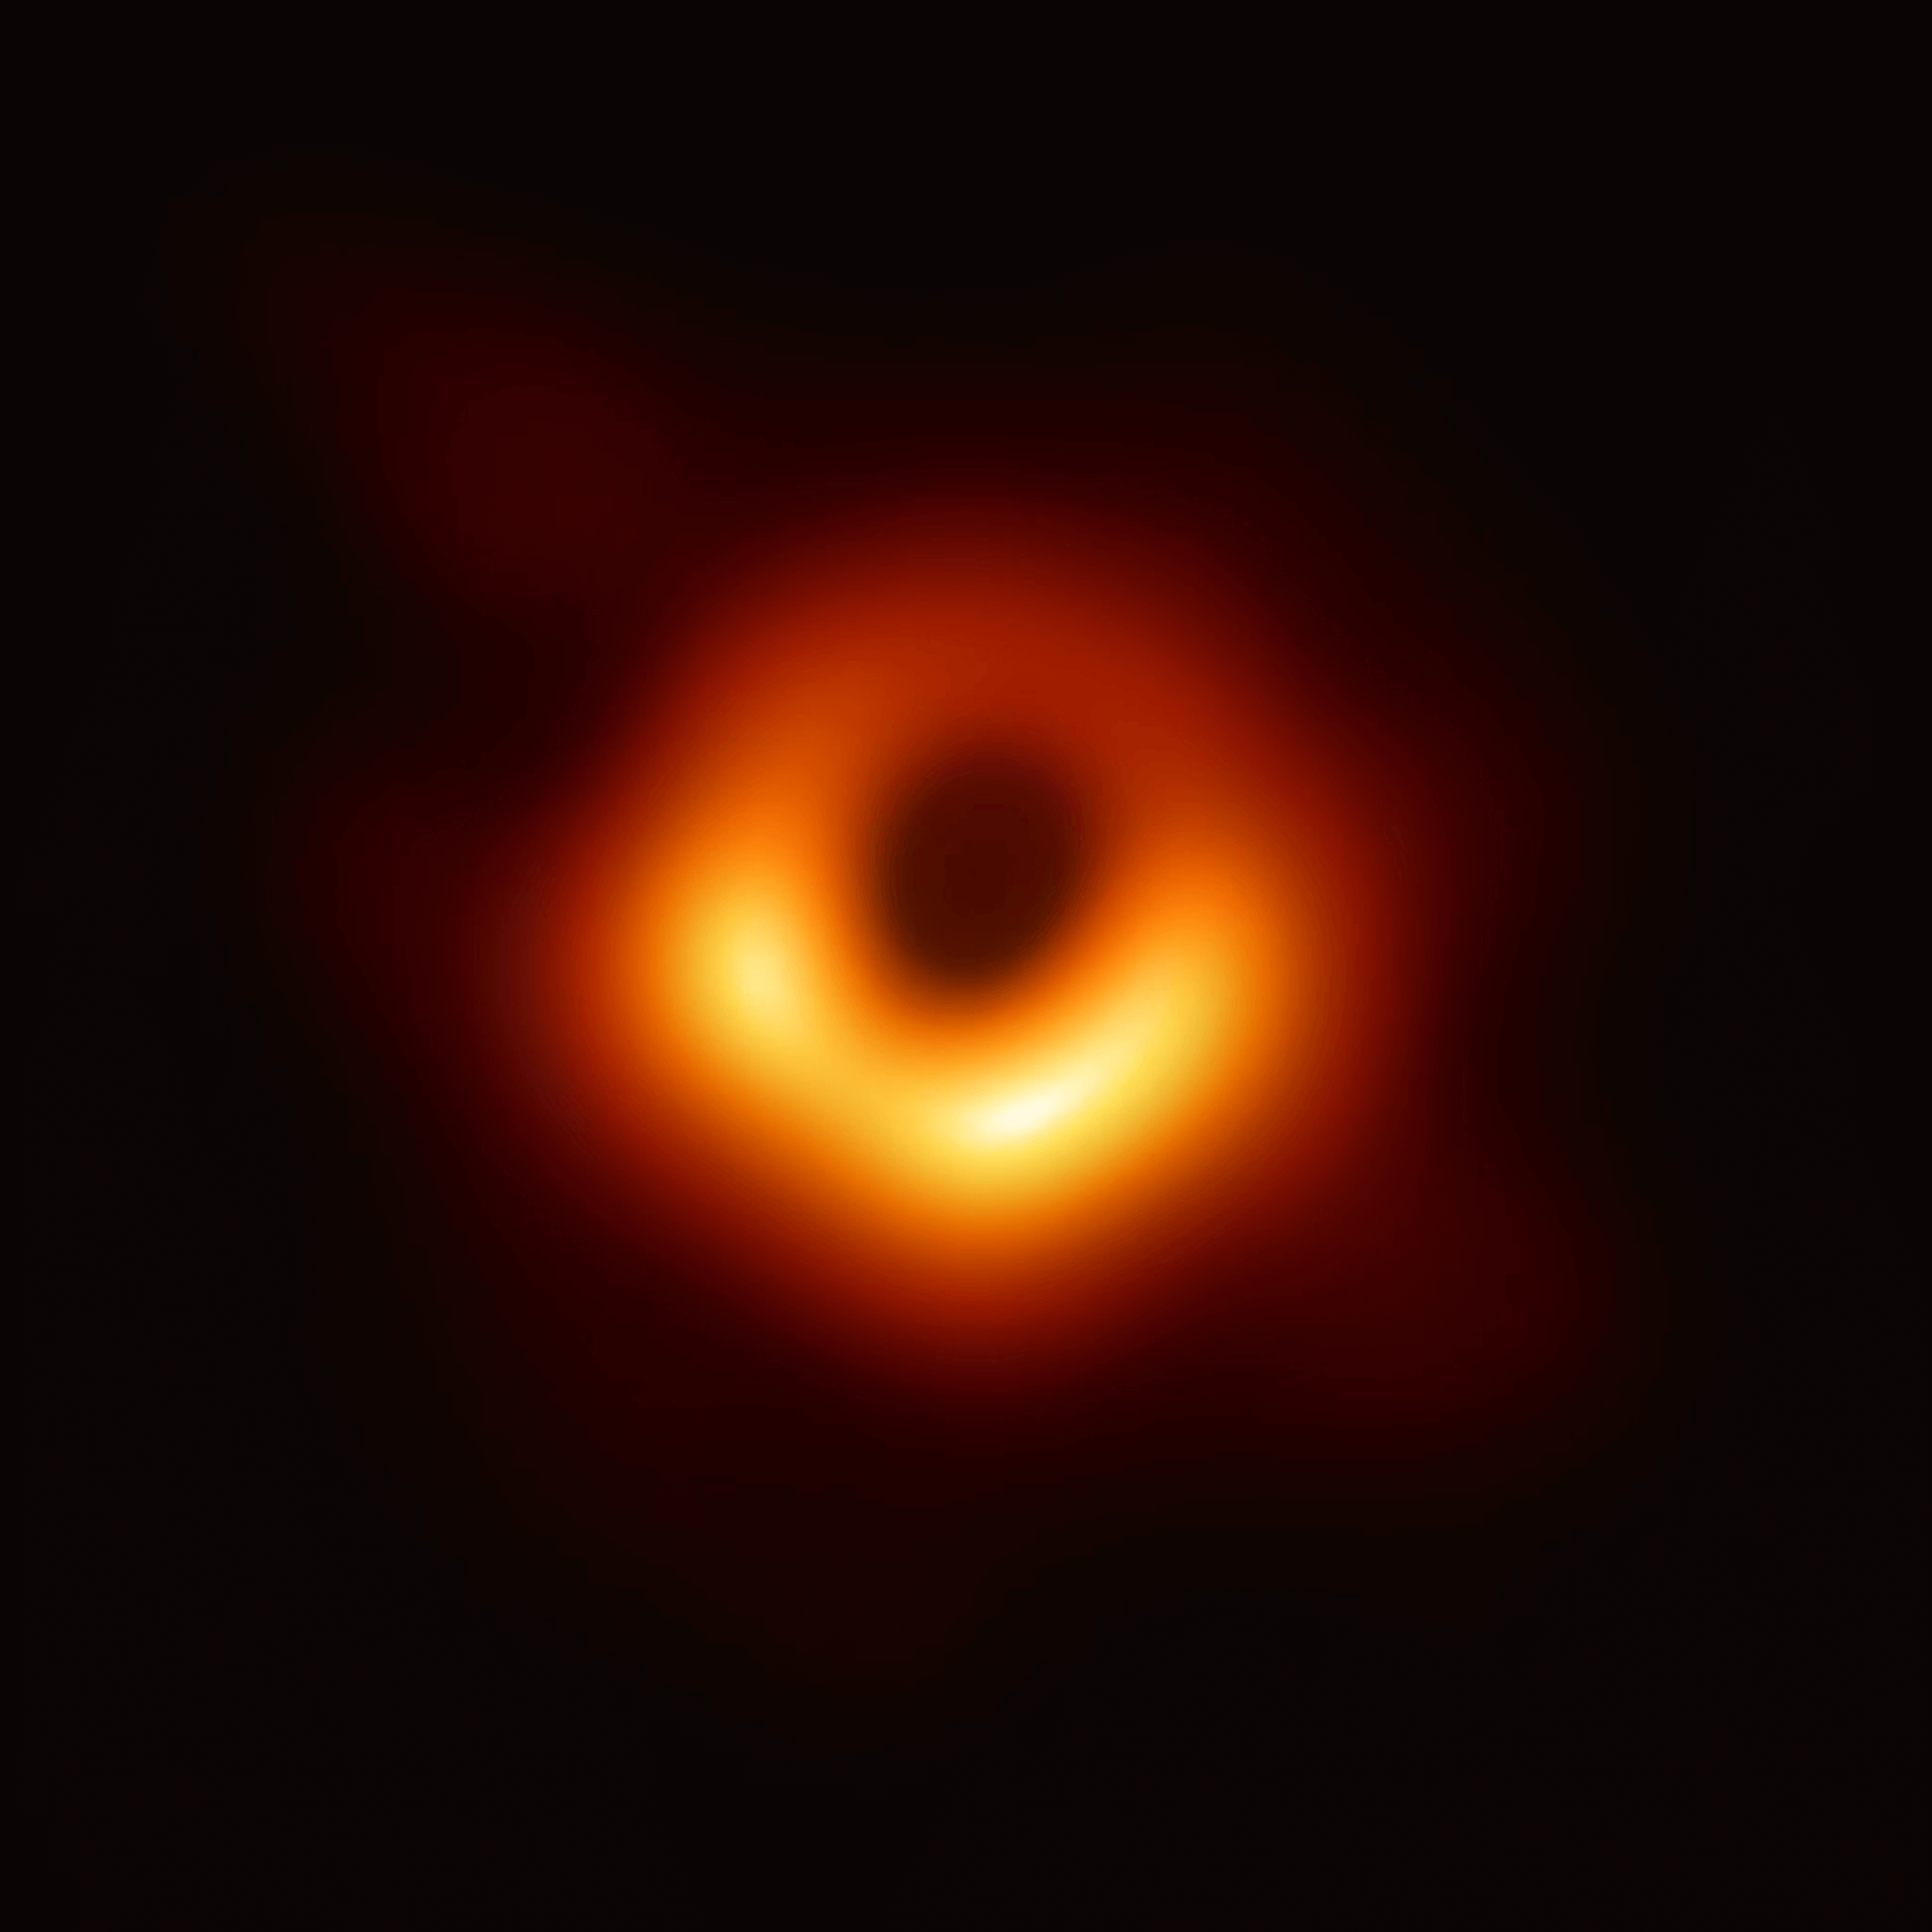 Black hole image from a space telescope